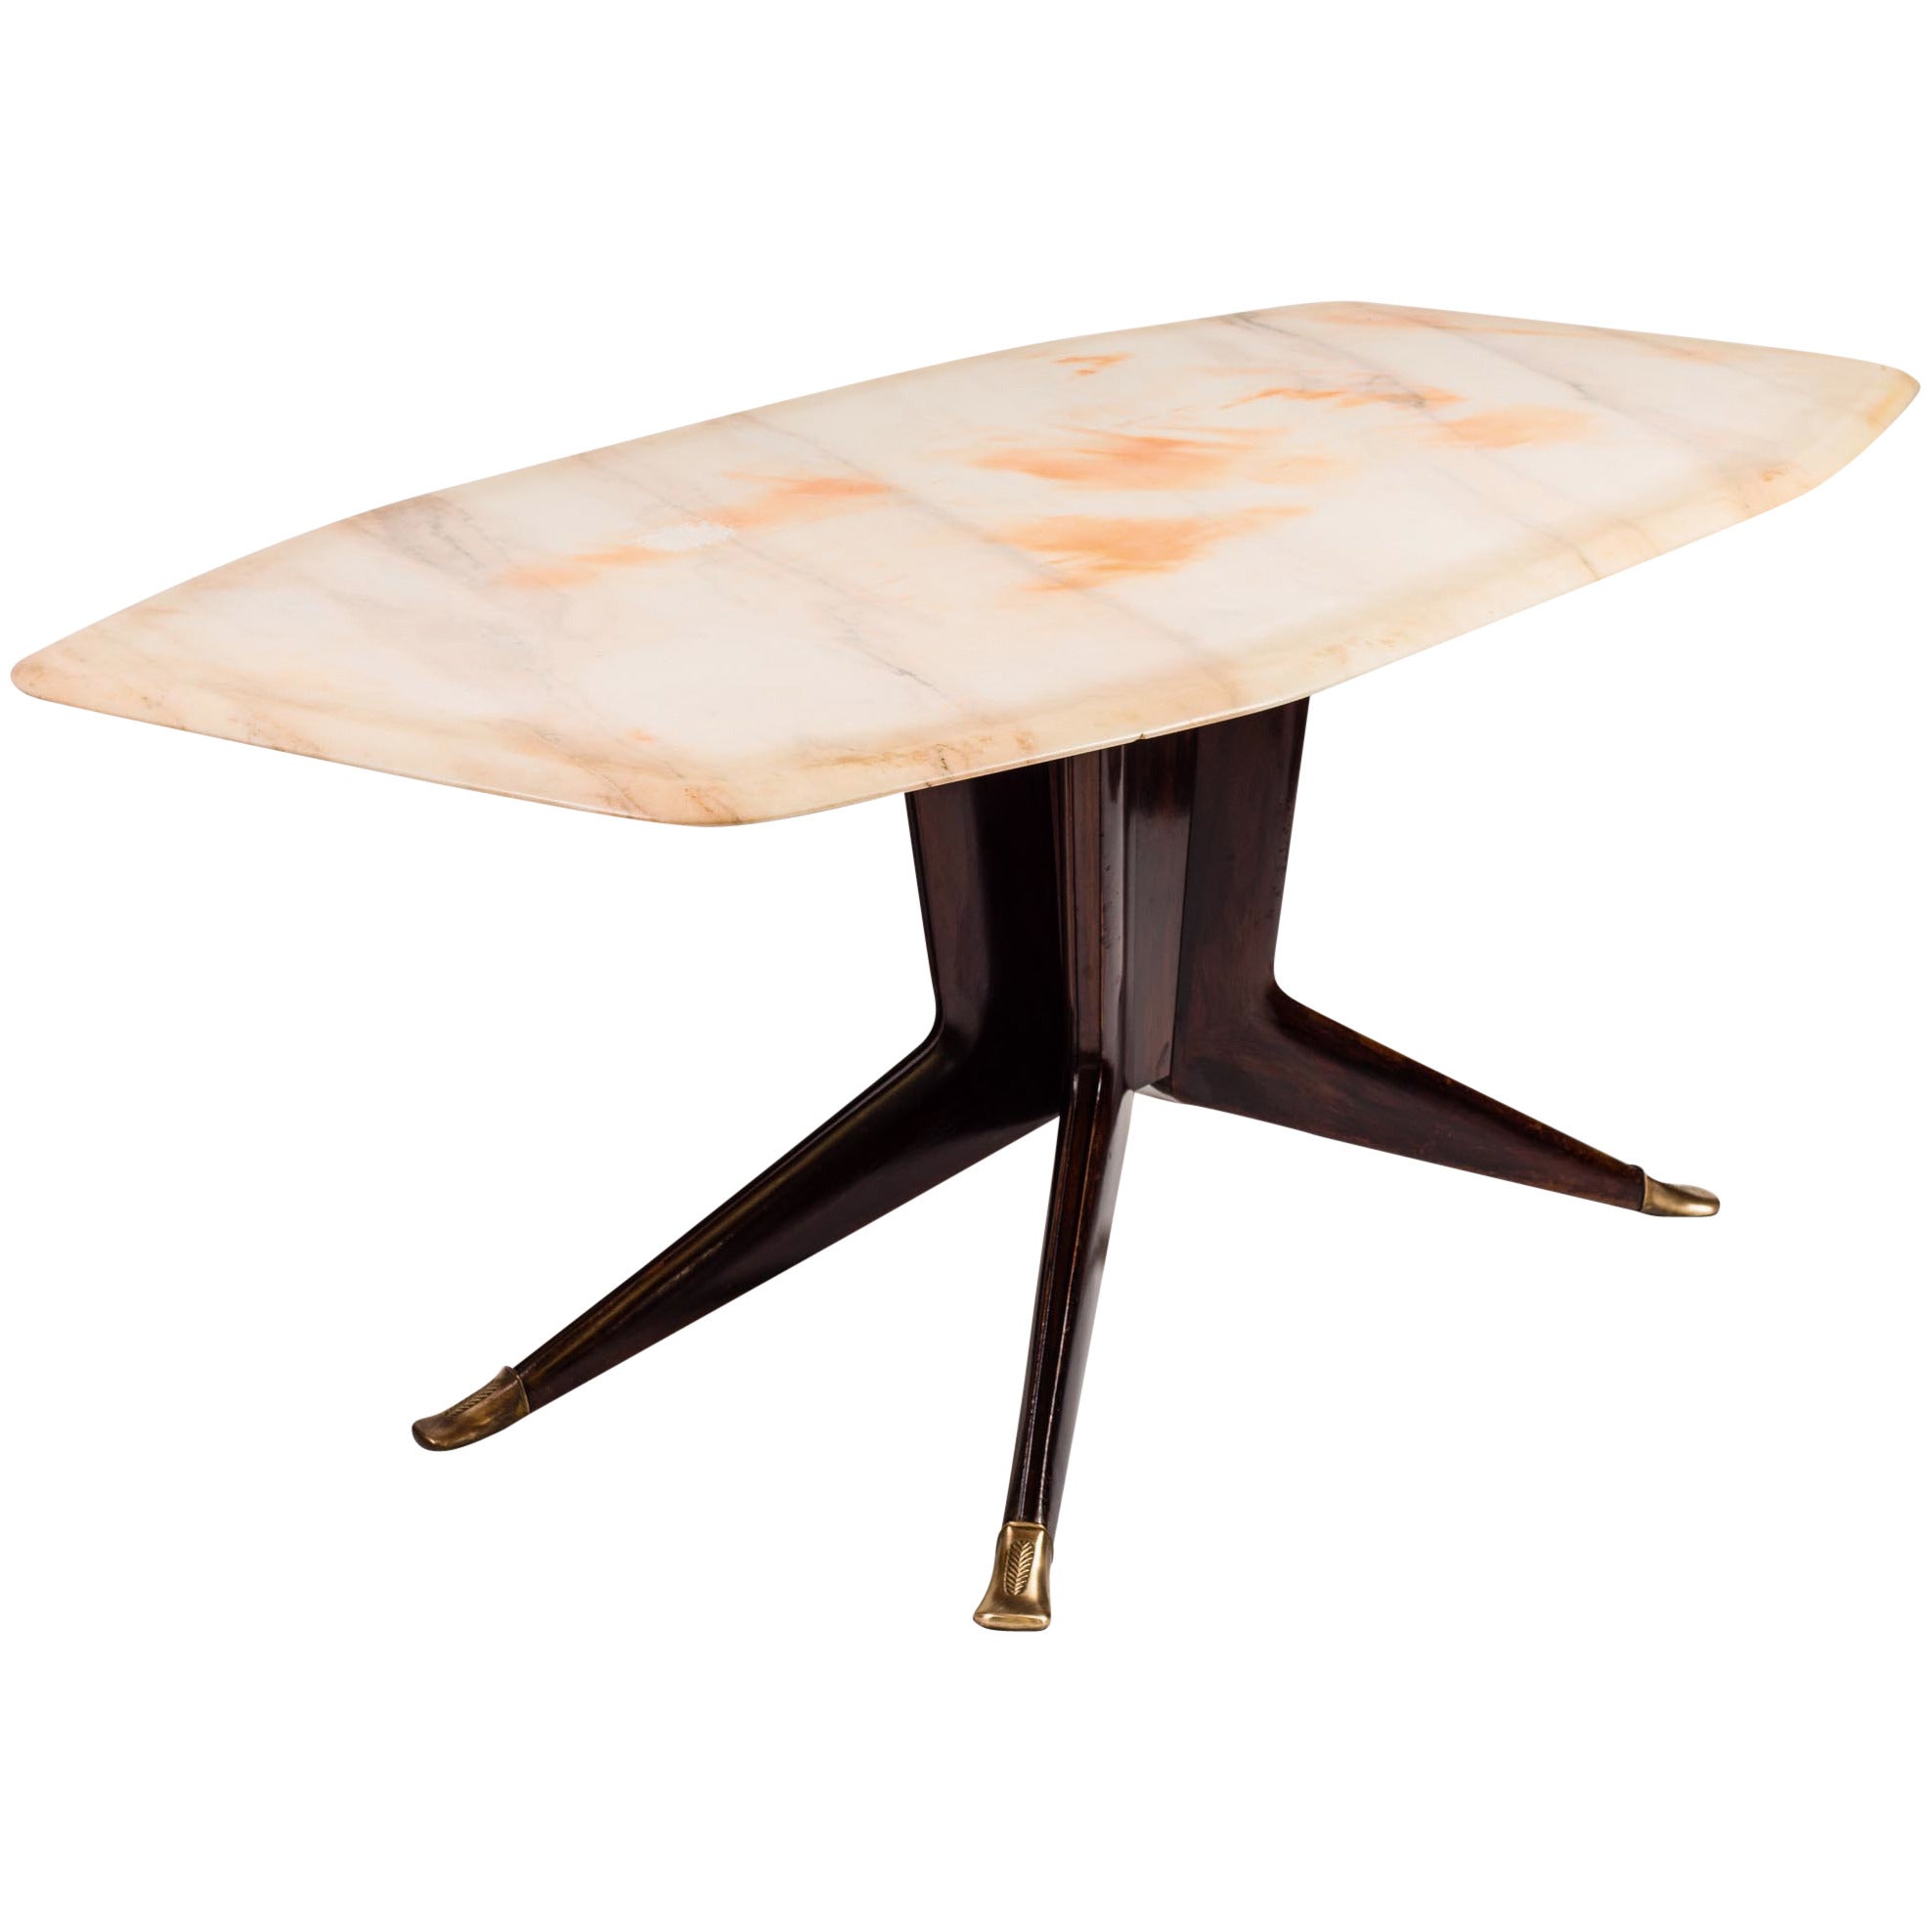 Dining Table in the Style of Paolo Buffa, 1950s